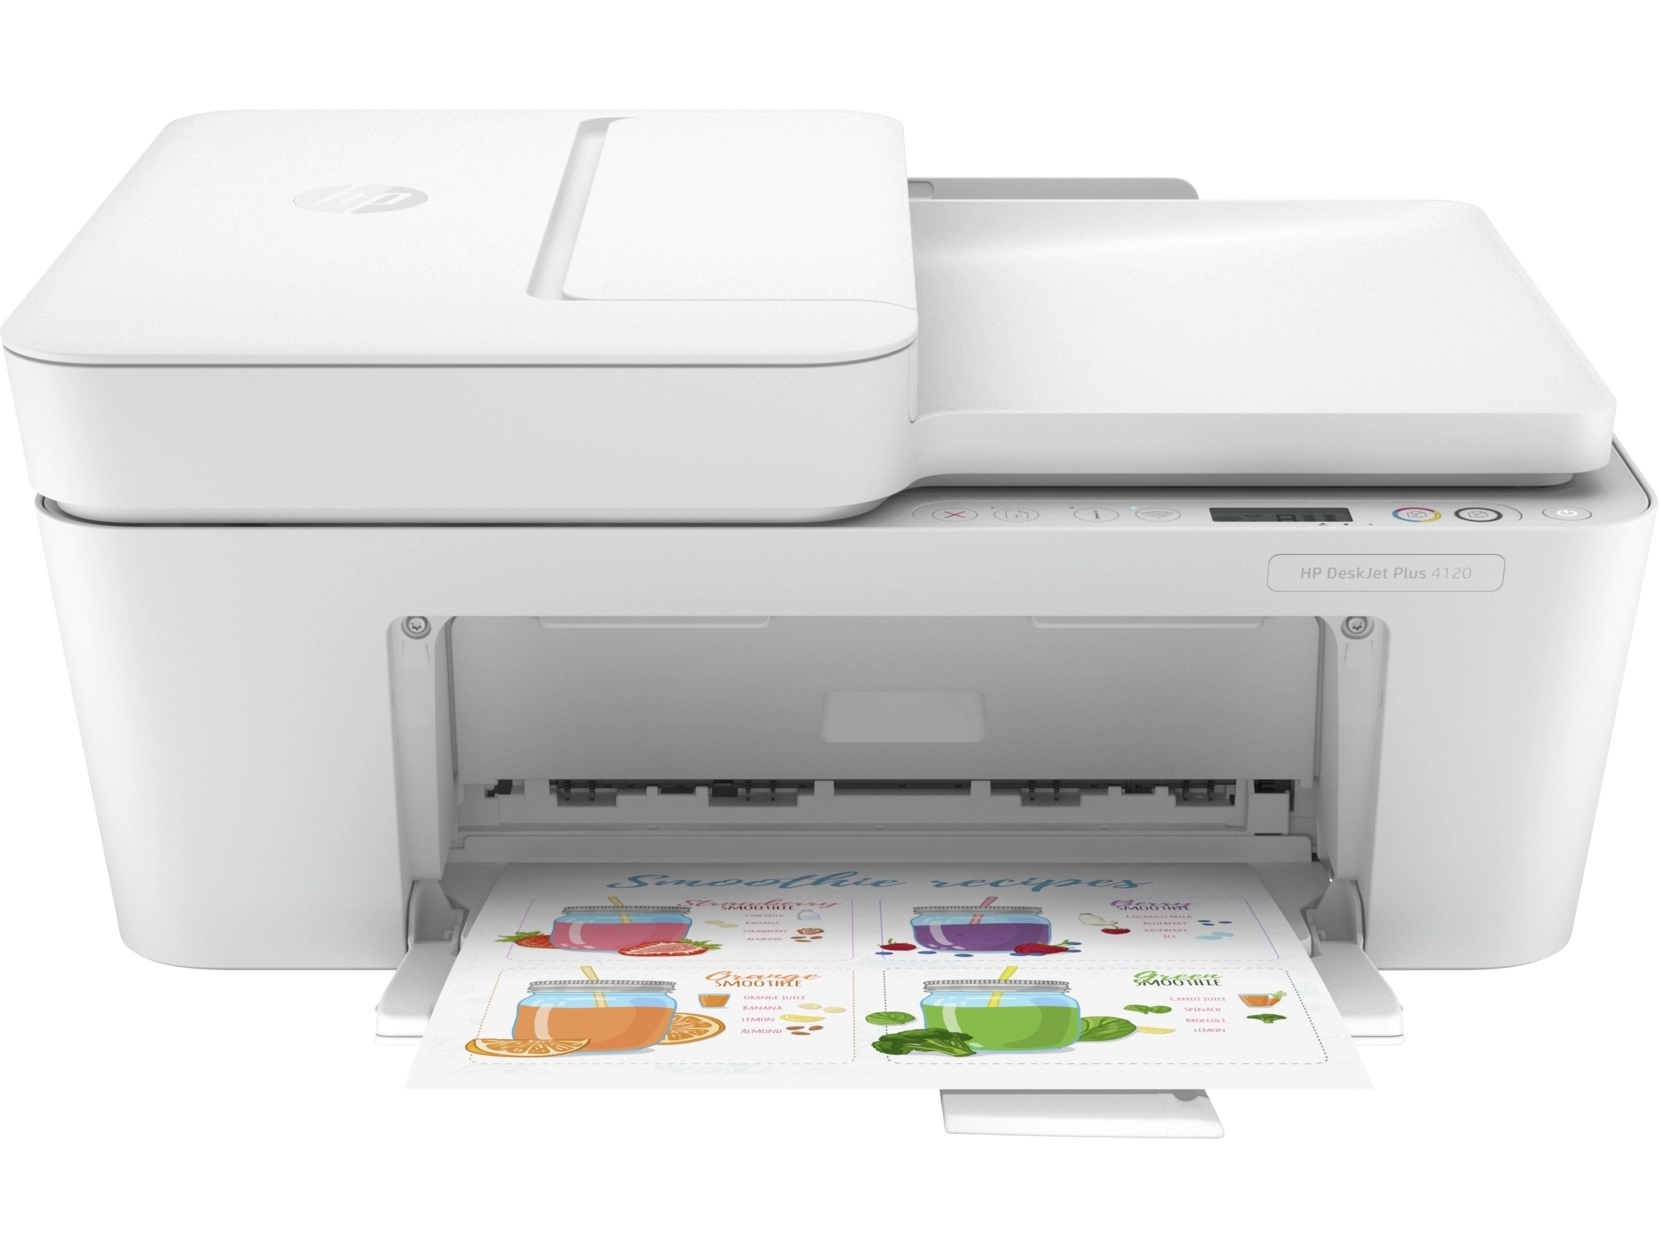 MFD HP DeskJet Plus 4120, White A4, up to 8,5ppm/5,5ppm, ADF 35p 1200x1200, Copy 8,5ppm/5,5ppm, 4800x1200 dpi, FAX, Up to 1000 pages/month, Hi-Speed USB 2.0,Wi-Fi, (HP 305 Black 120p, HP 305 C/M/Y 100p) XL/XXL.